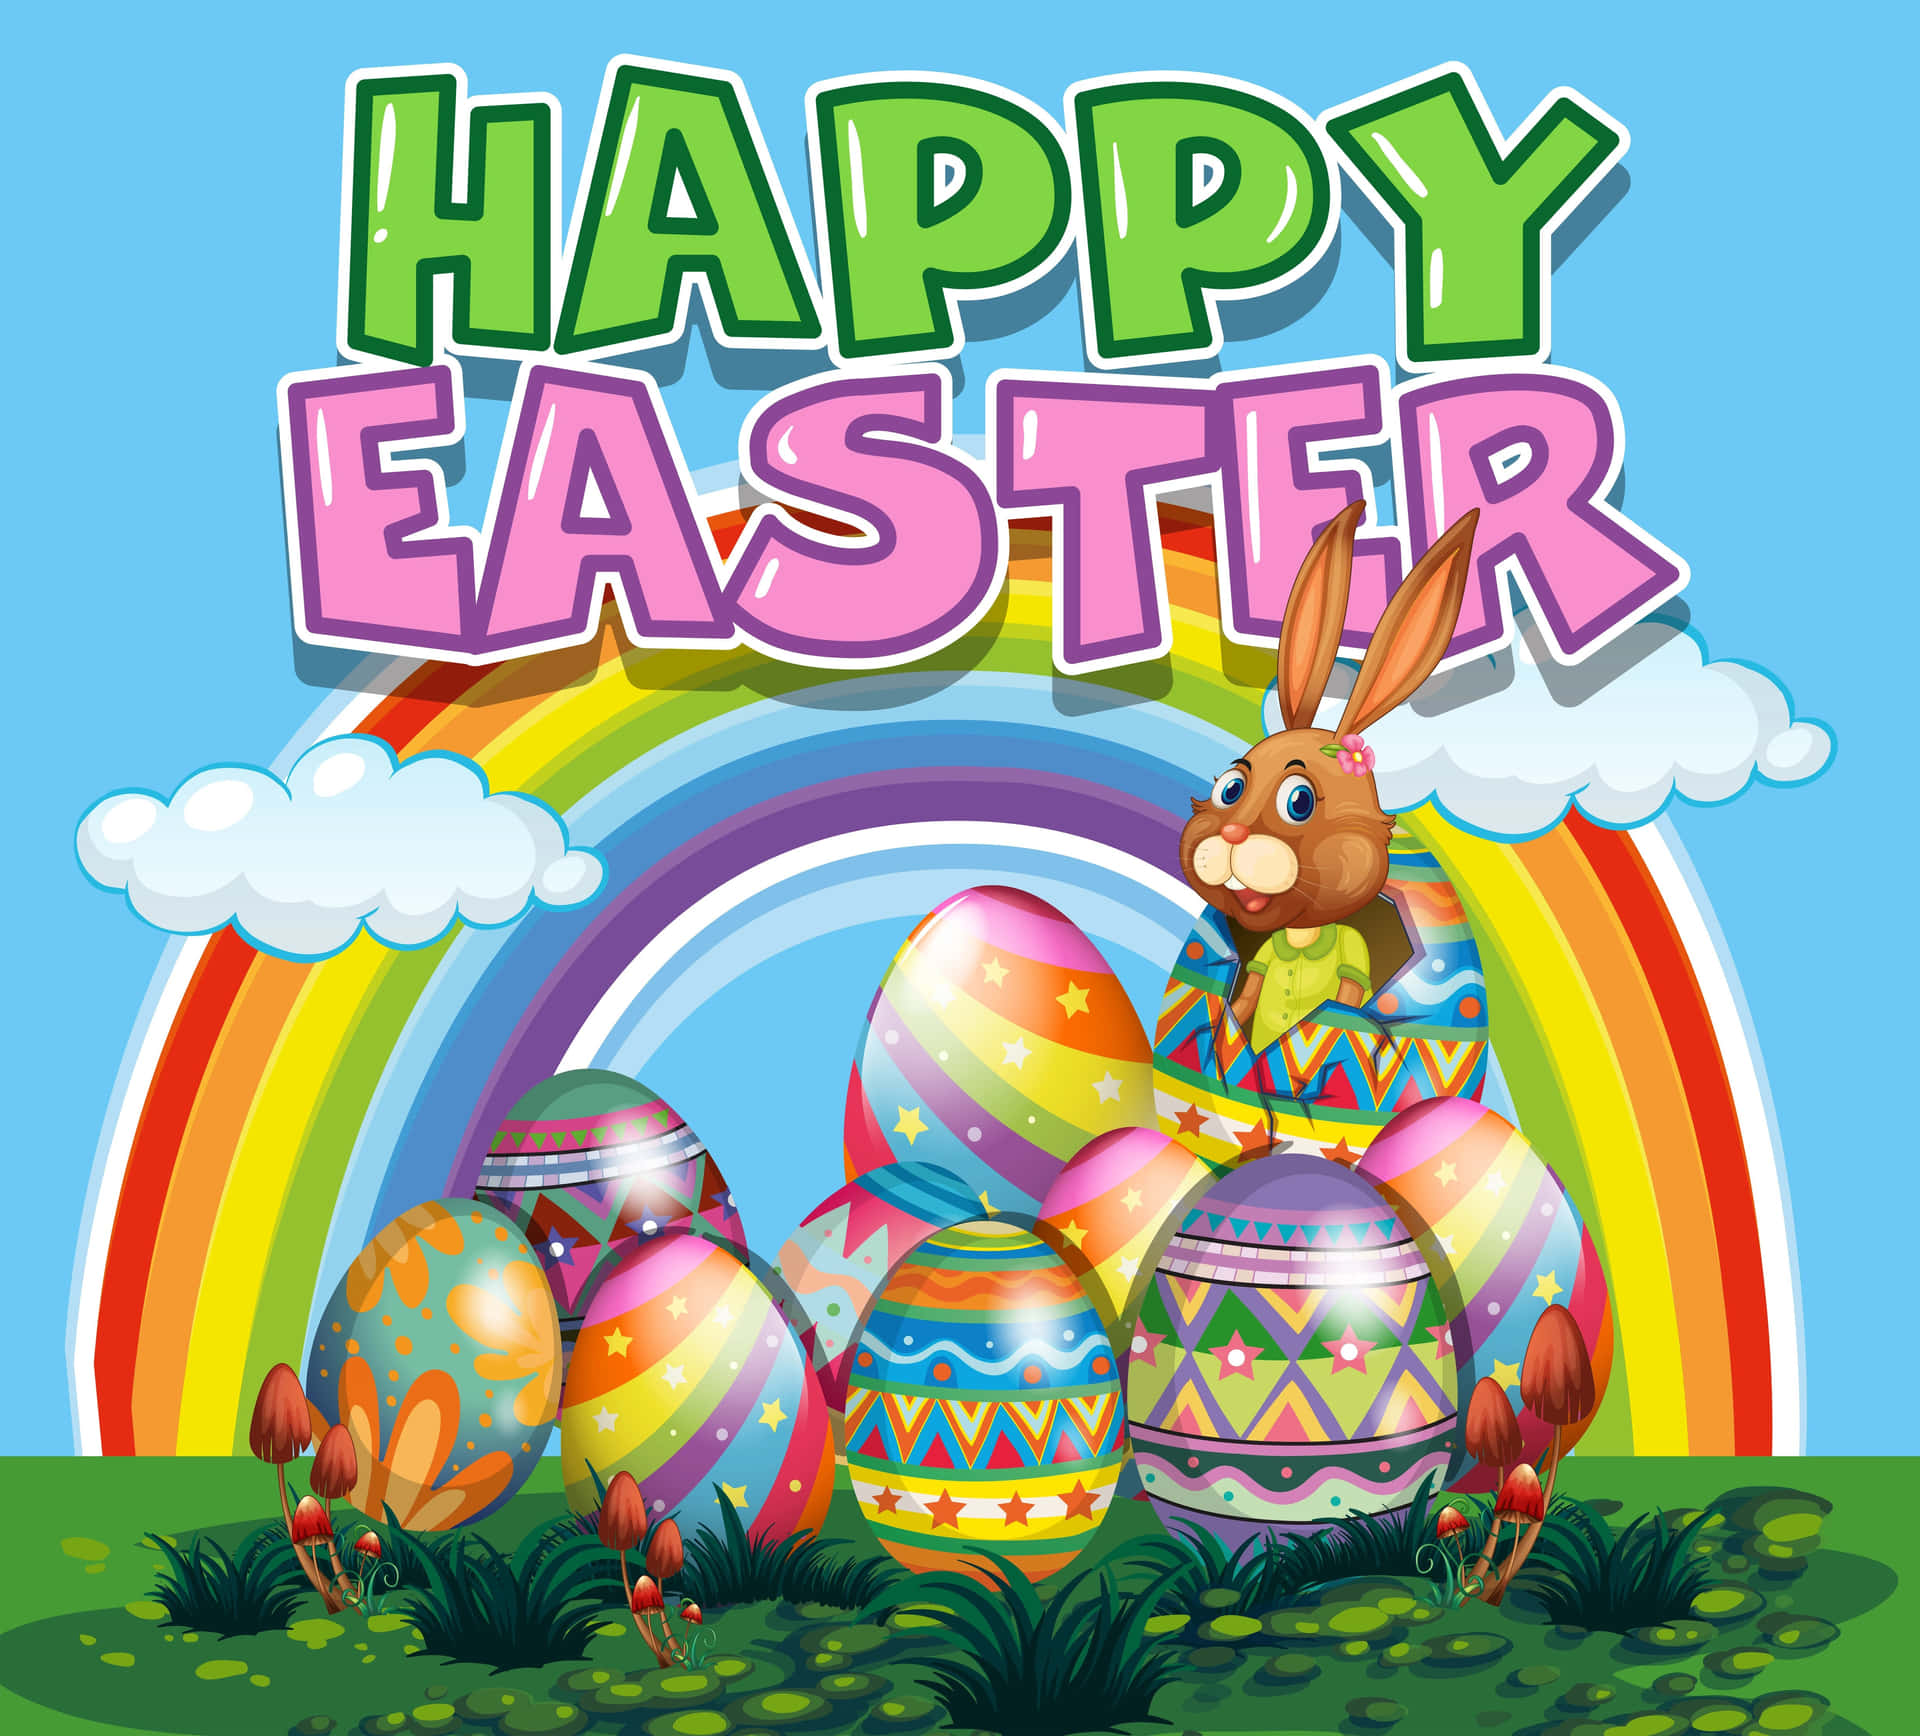 "Celebrating Easter with friends and family - Wishing You a Happy Easter!"